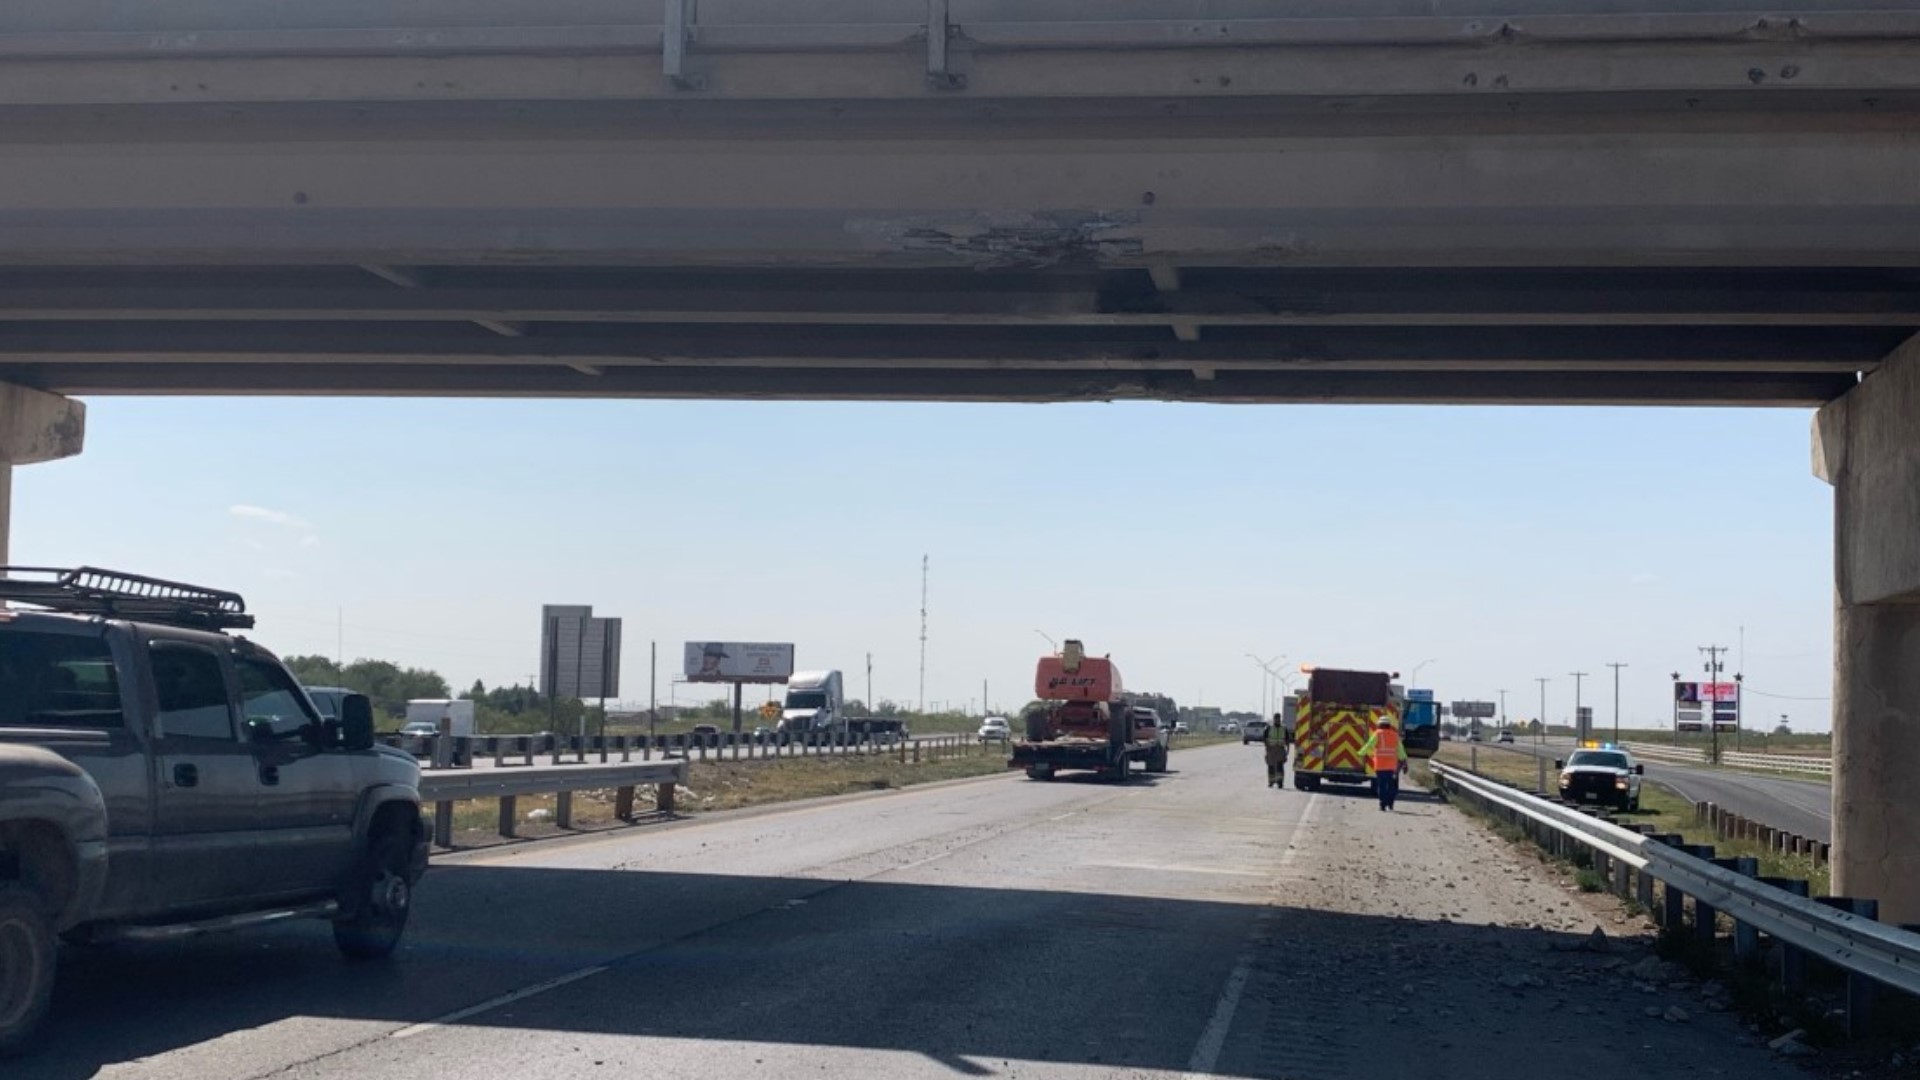 TxDOT says this specific overpass has been hit five times in the past five years.